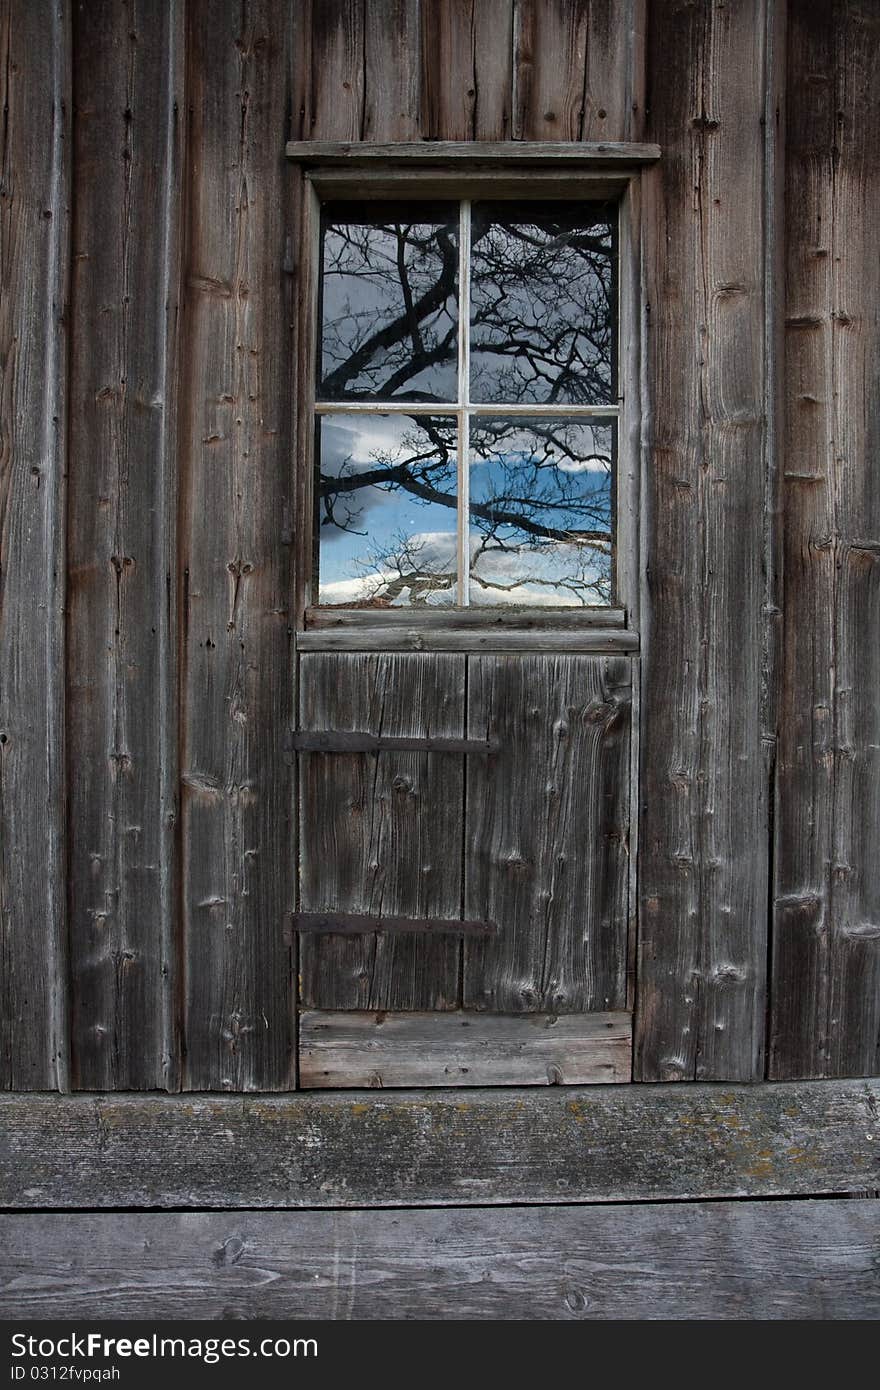 Old woodshed with reflection of sky and tree brunches in a window. Old woodshed with reflection of sky and tree brunches in a window